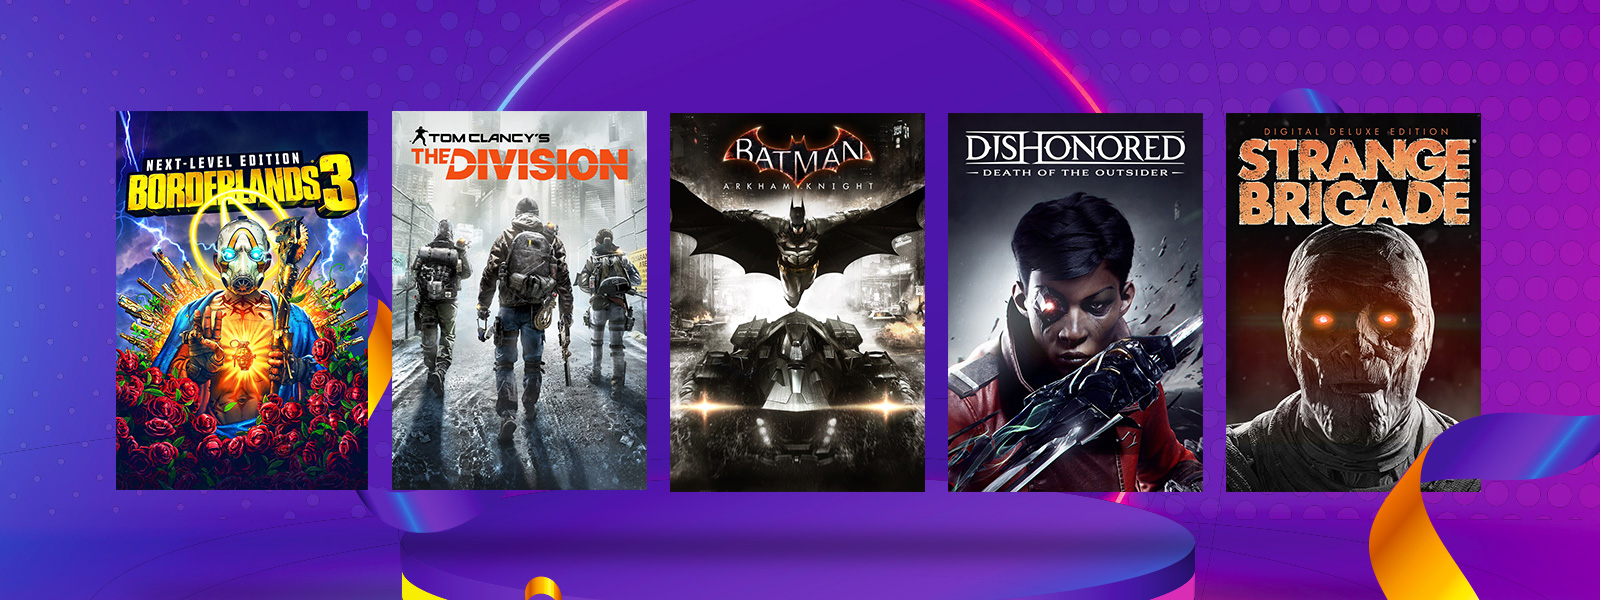 Box art from games that are part of the Games Under $20 Sale, including Tom Clancy’s The Division, Batman: Arkham Knight, and Strange Brigade – Digital Deluxe Edition.